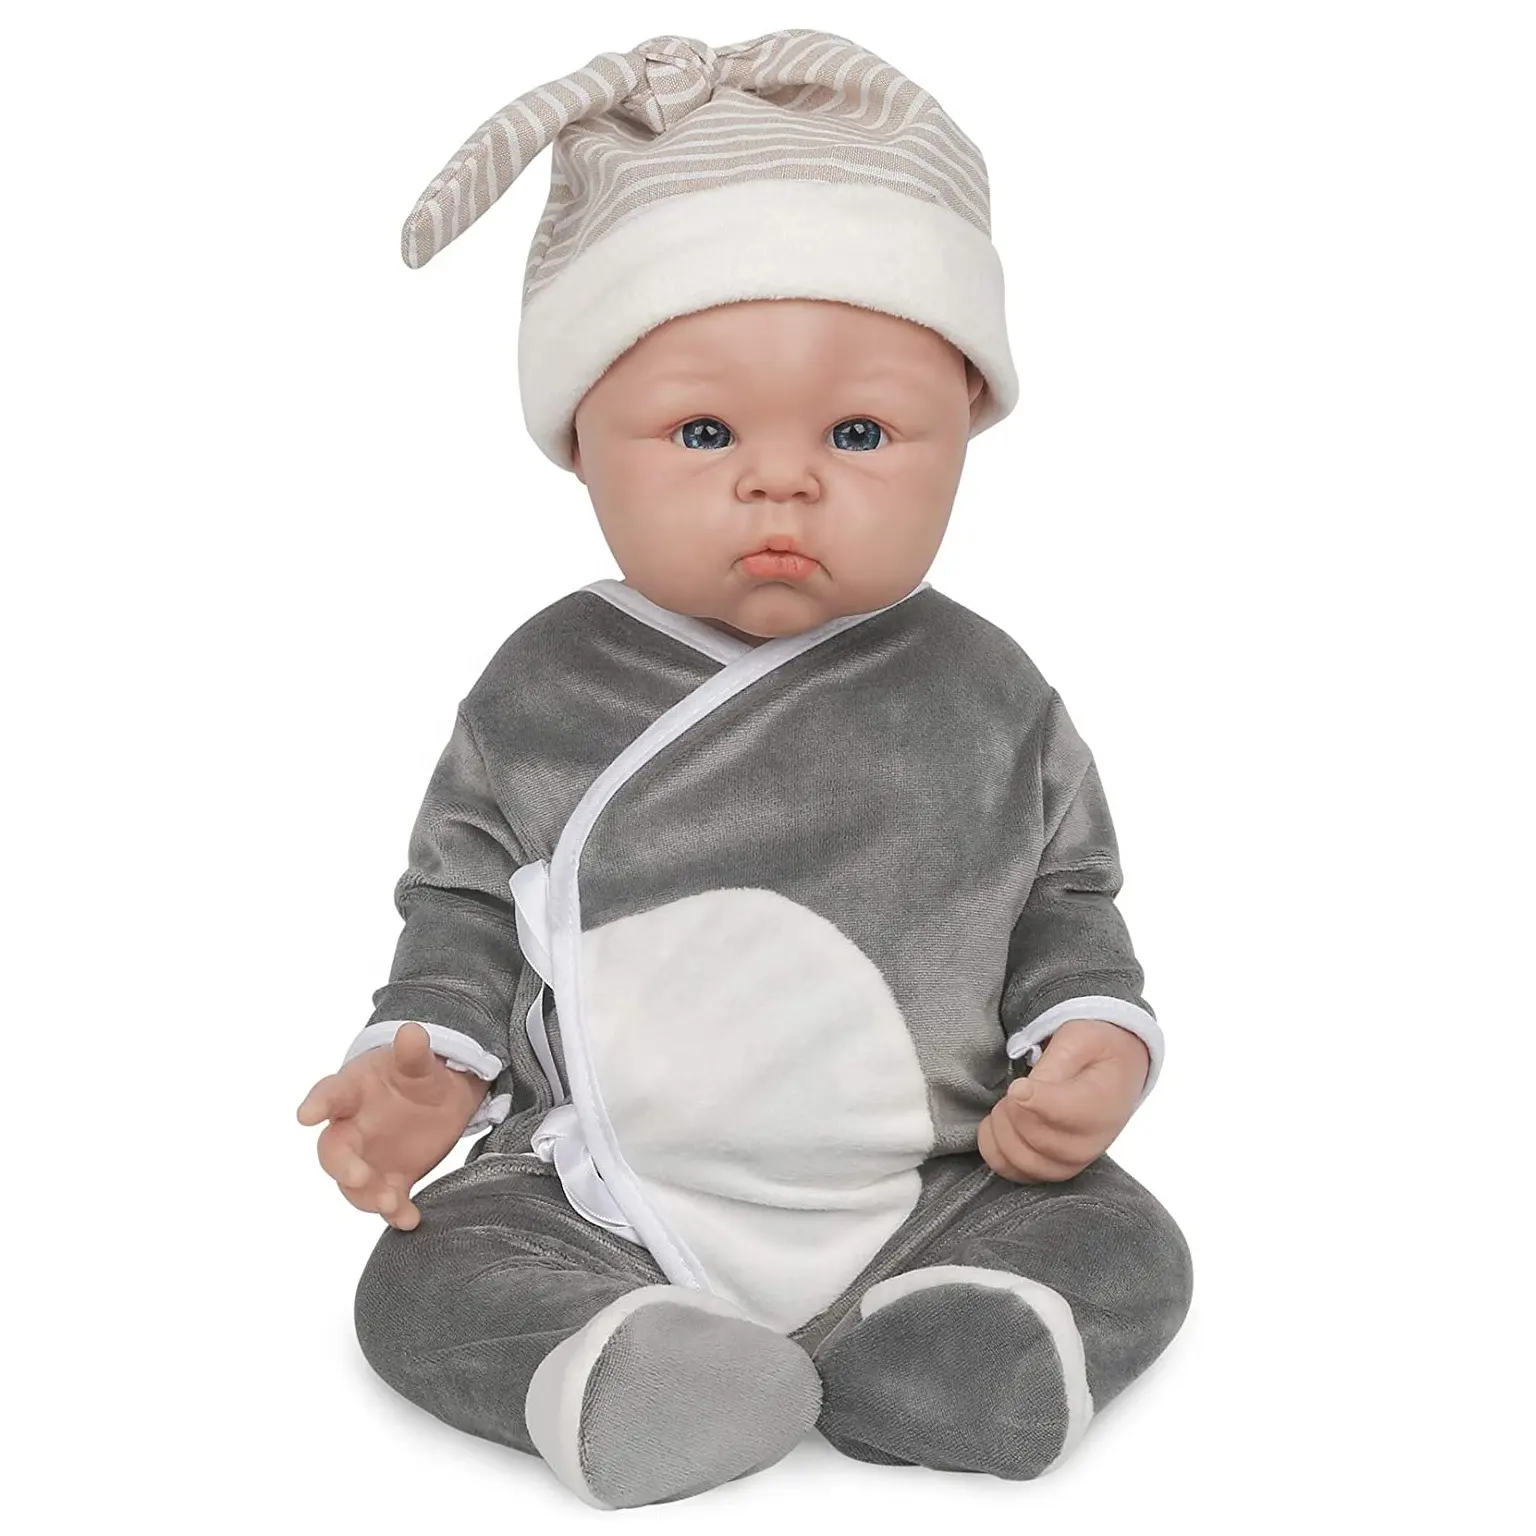 19 Inch Realistic Full Body Silicone Baby Doll Good Playmate for Kids